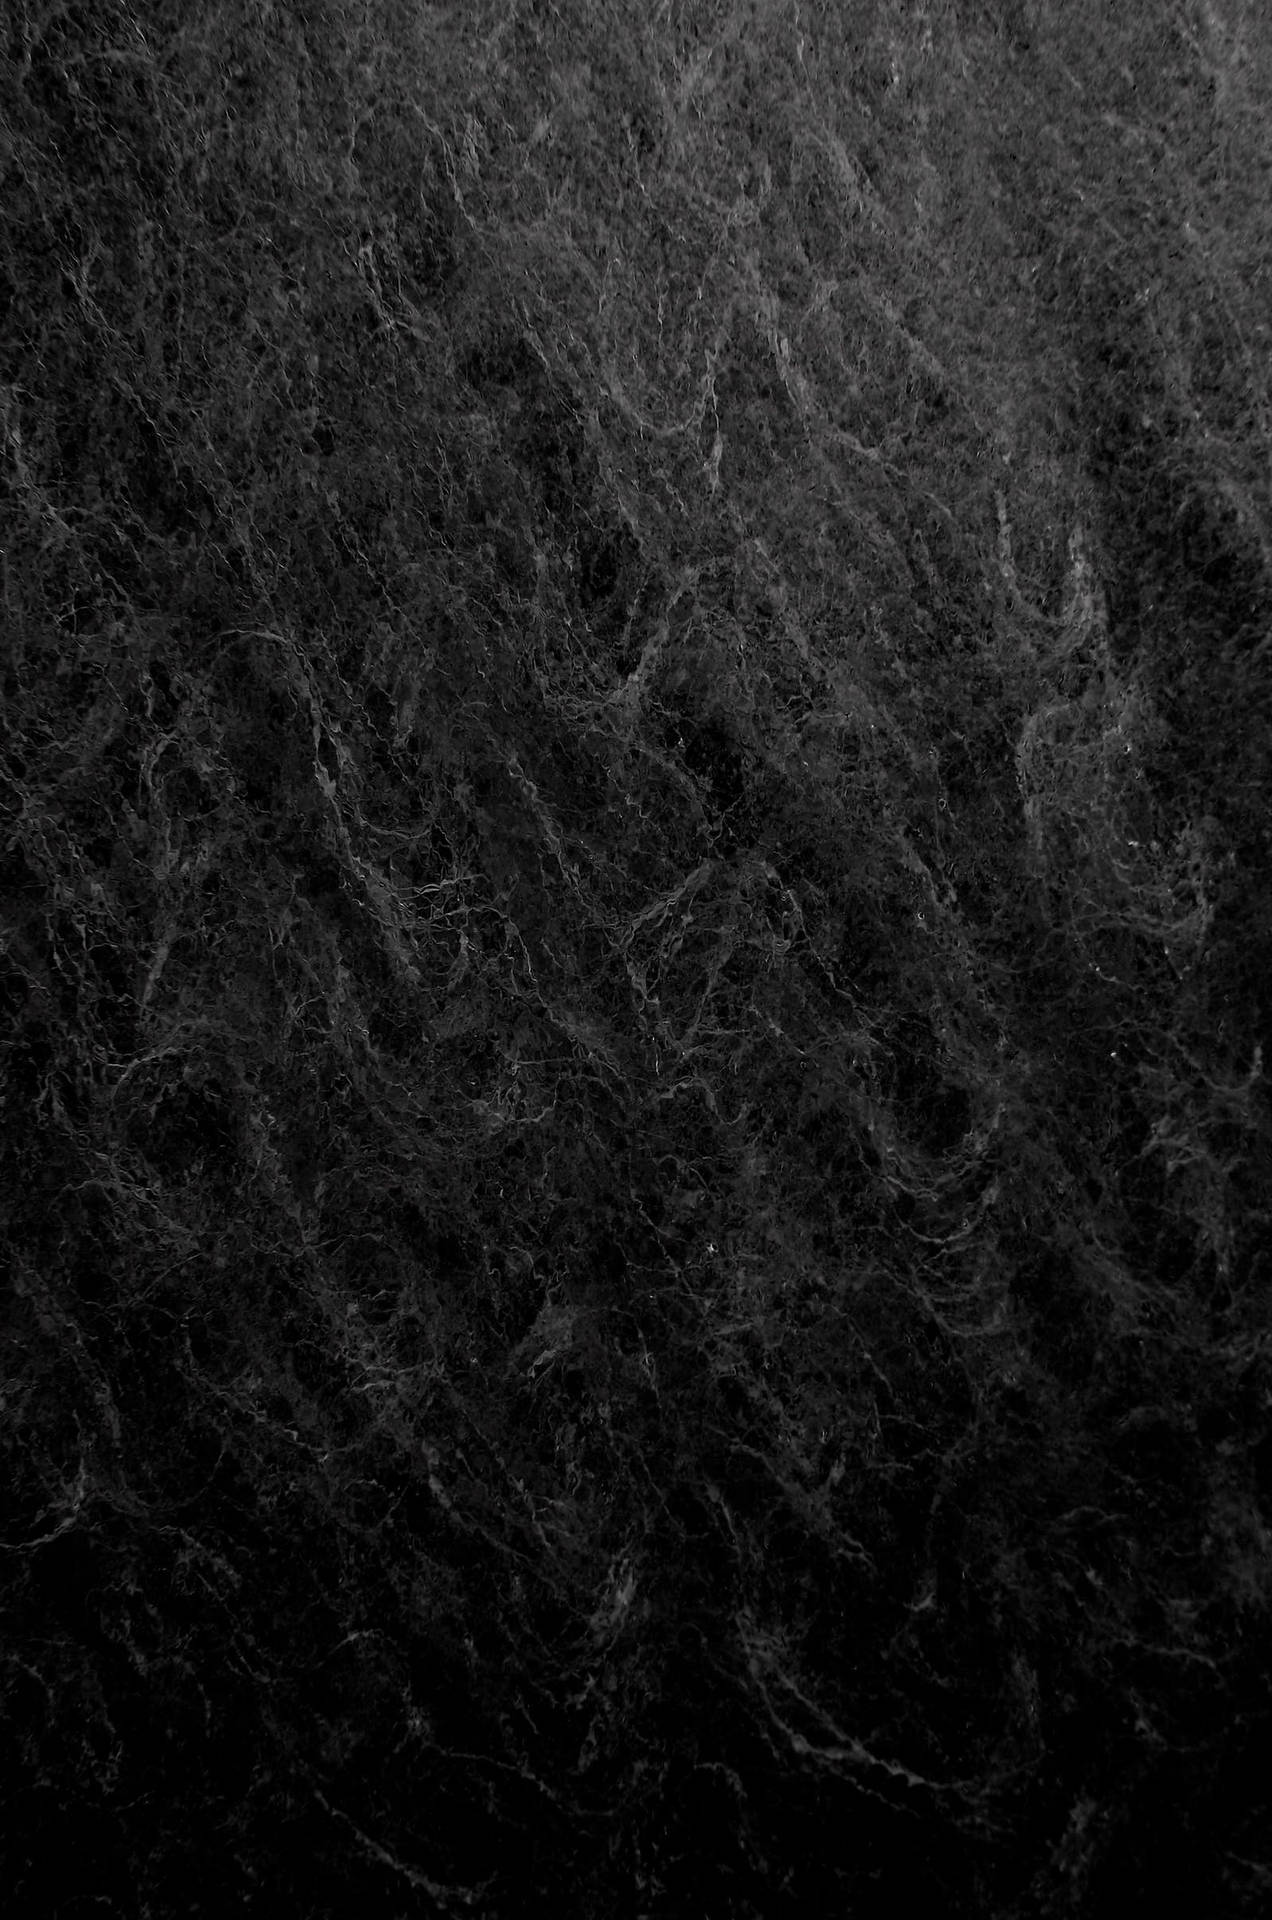 Abstract Waves Black And Grey Iphone Wallpaper